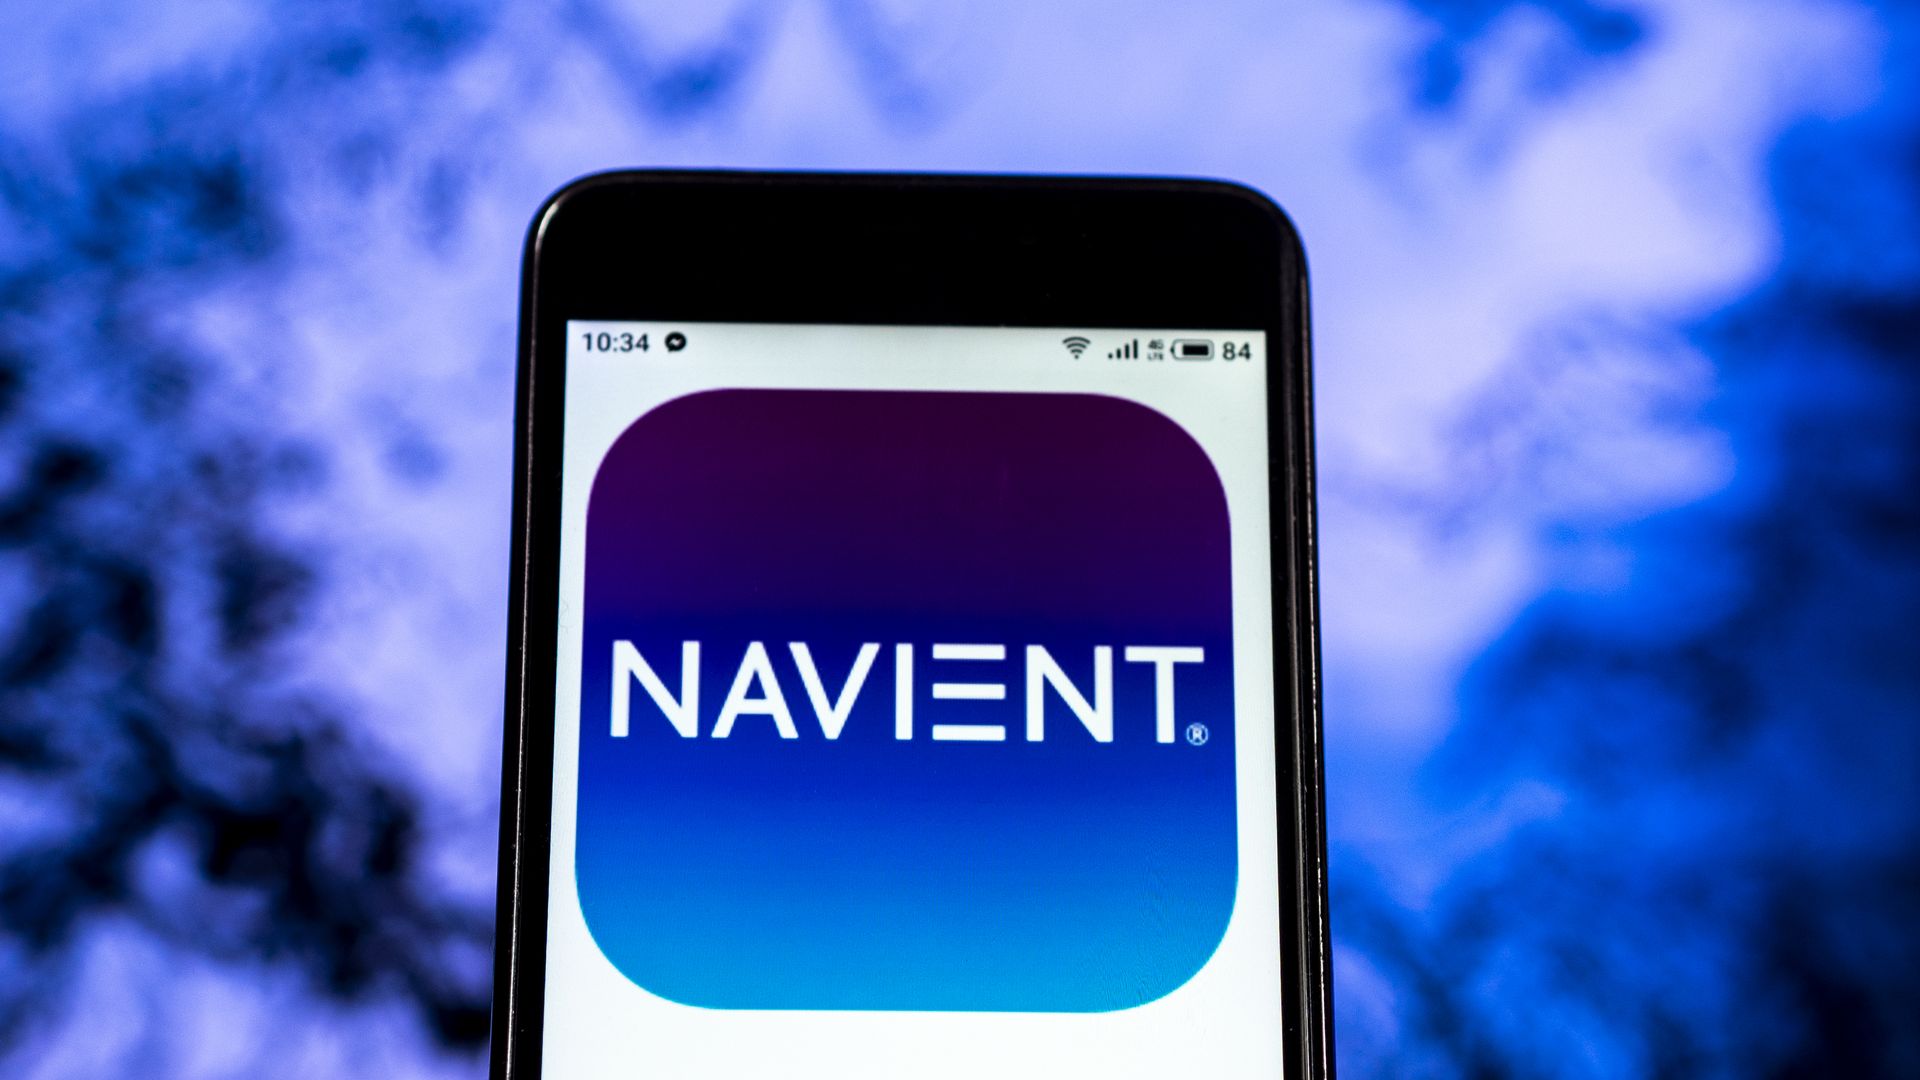 In this image, the Navient logo is displayed on a photo.